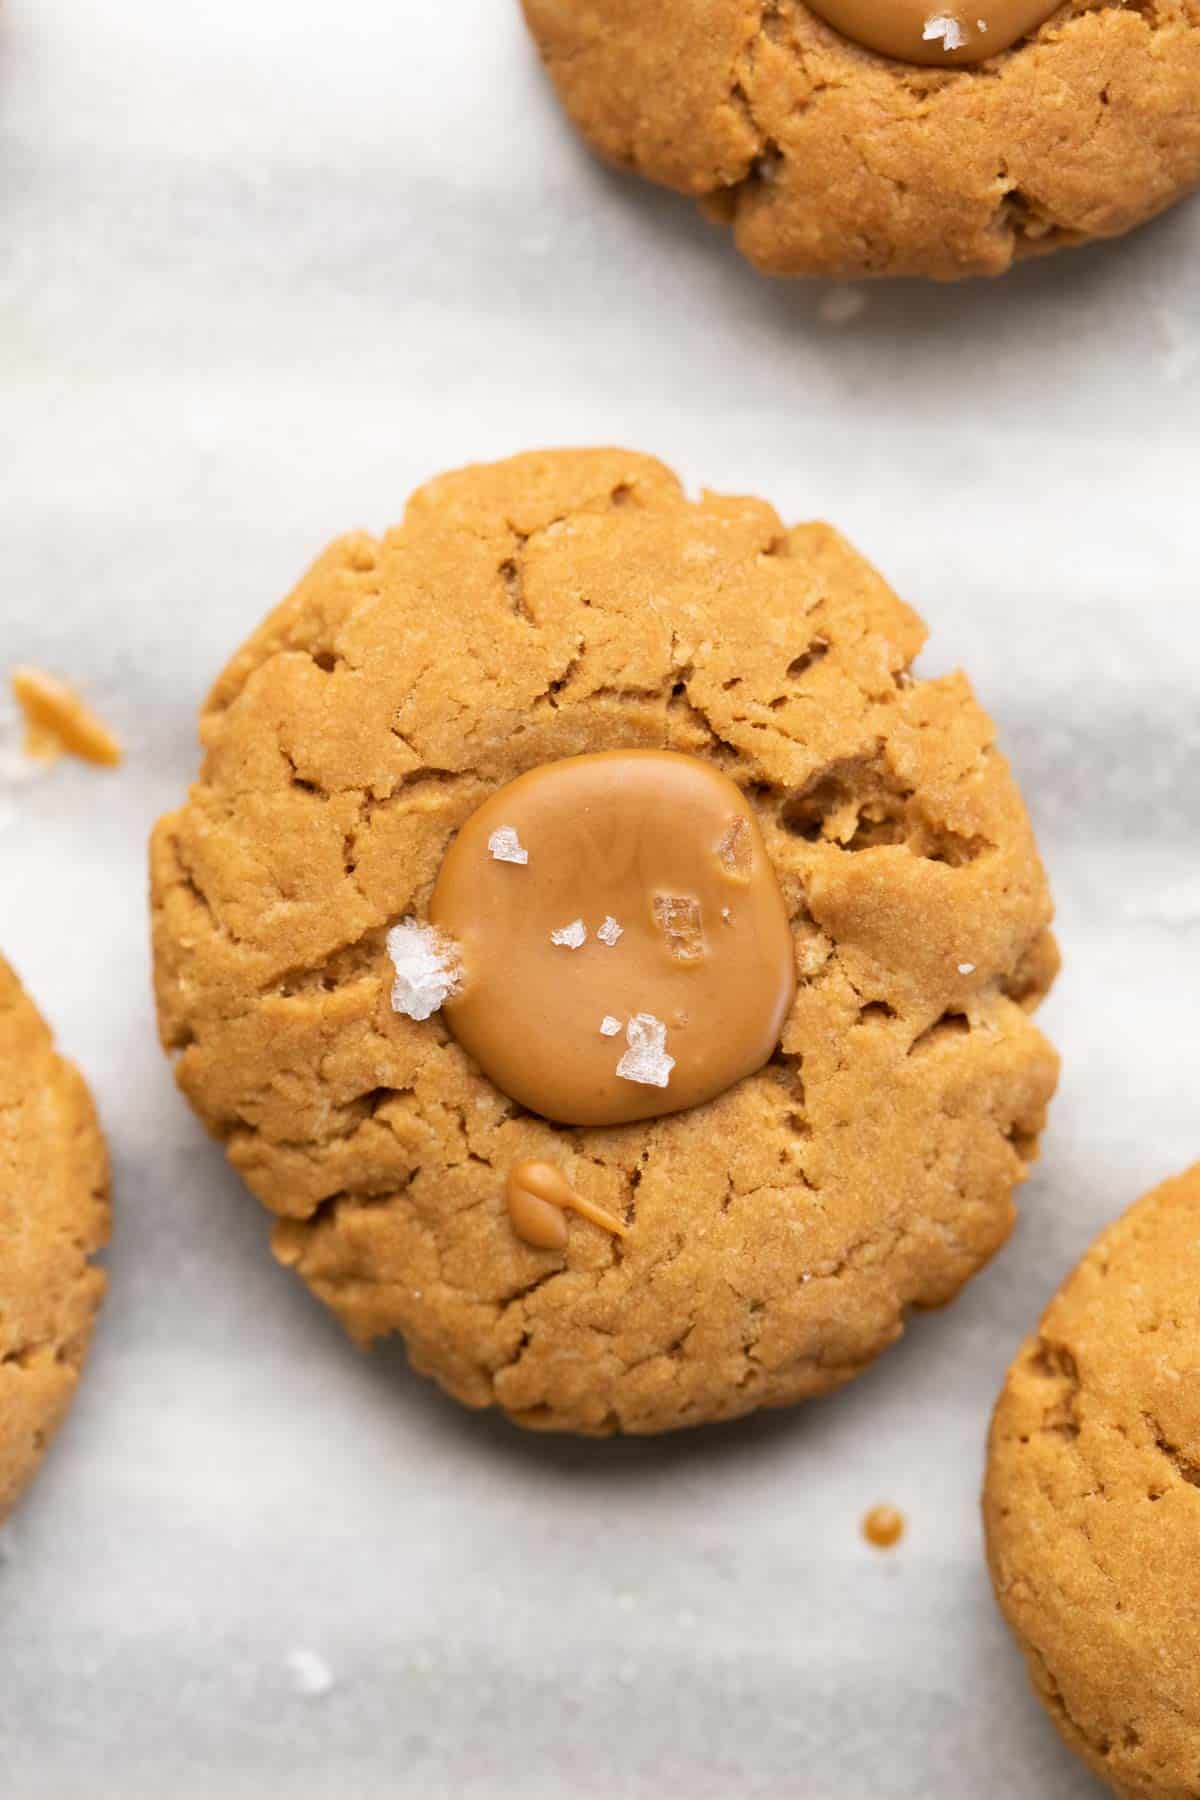 A shot of a biscoff thumbprint cookie with sea salt sprinkled on top.